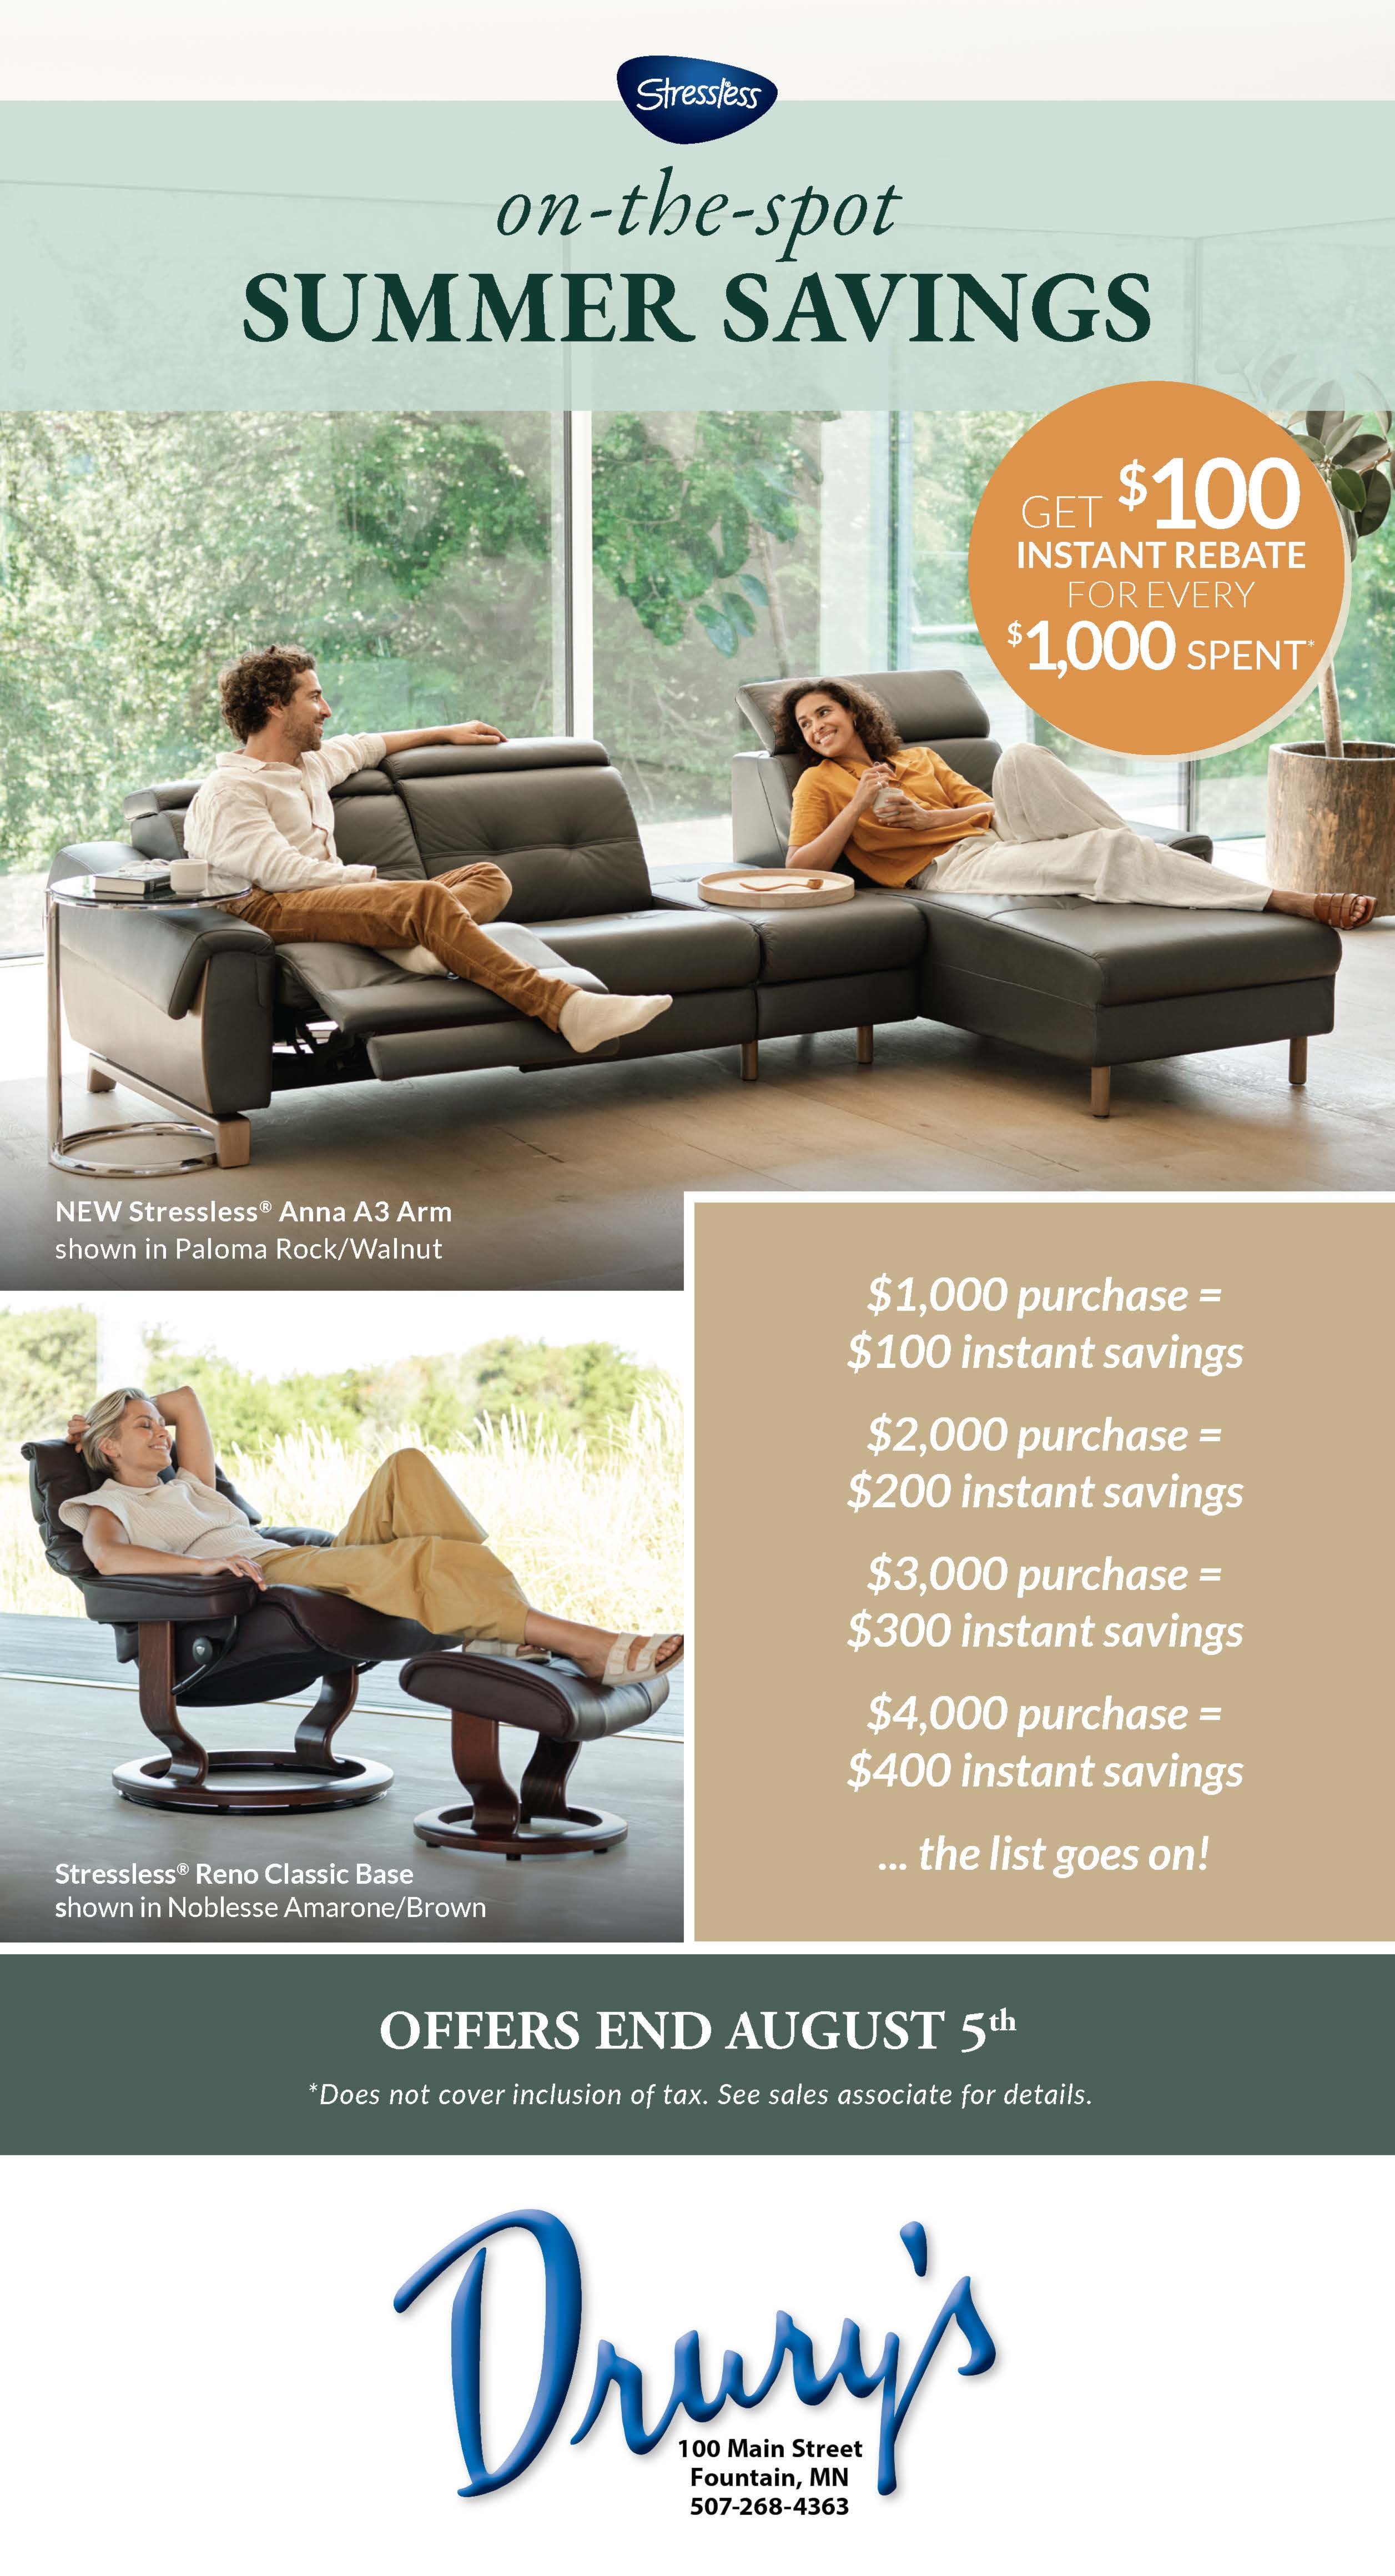 Instants Savings with Stressless